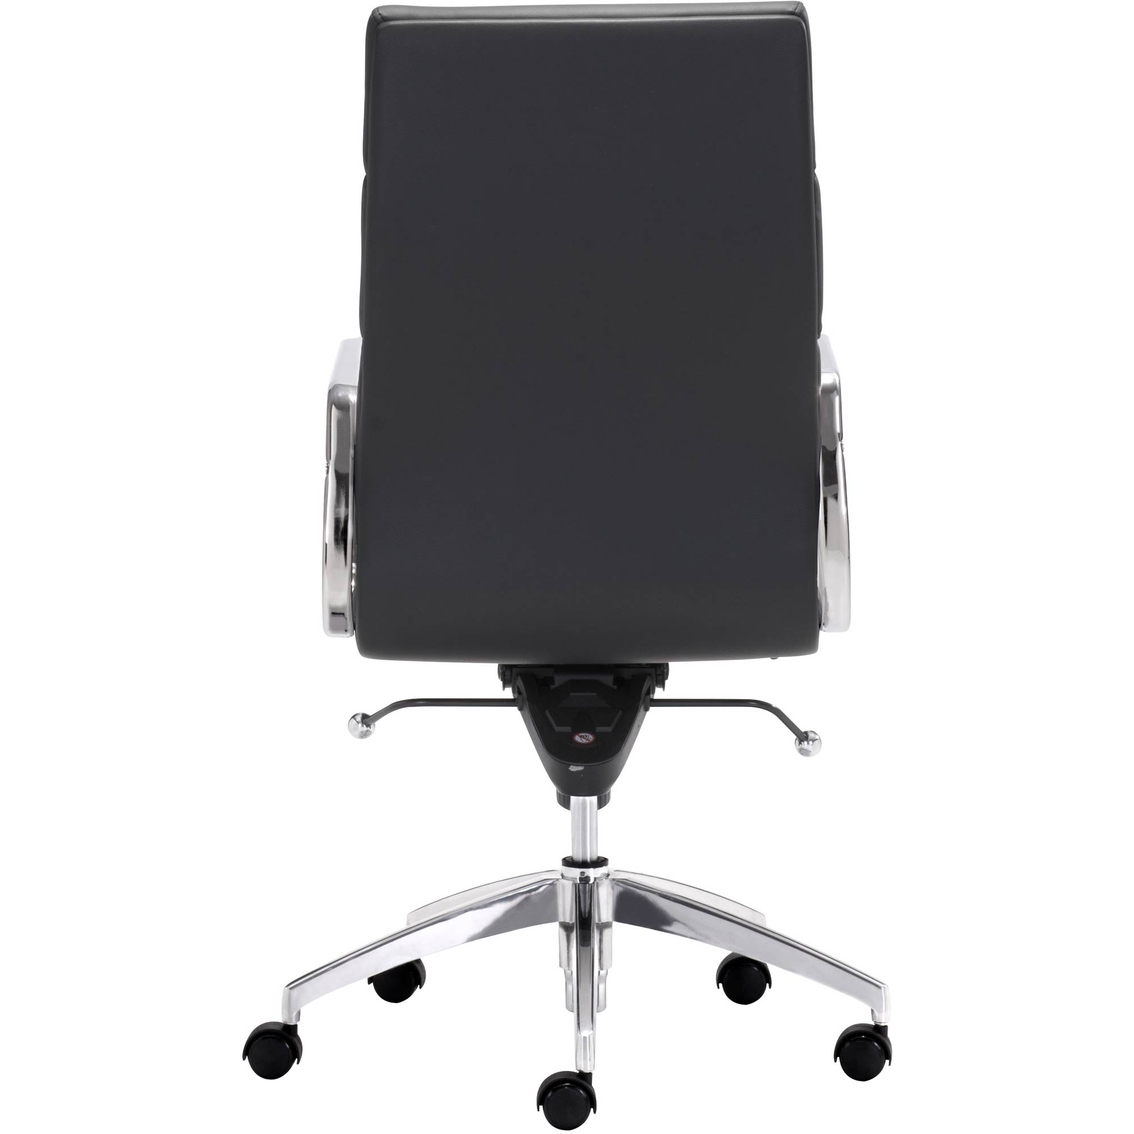 Zuo Modern Engineer High Back Office Chair Black - Image 2 of 4